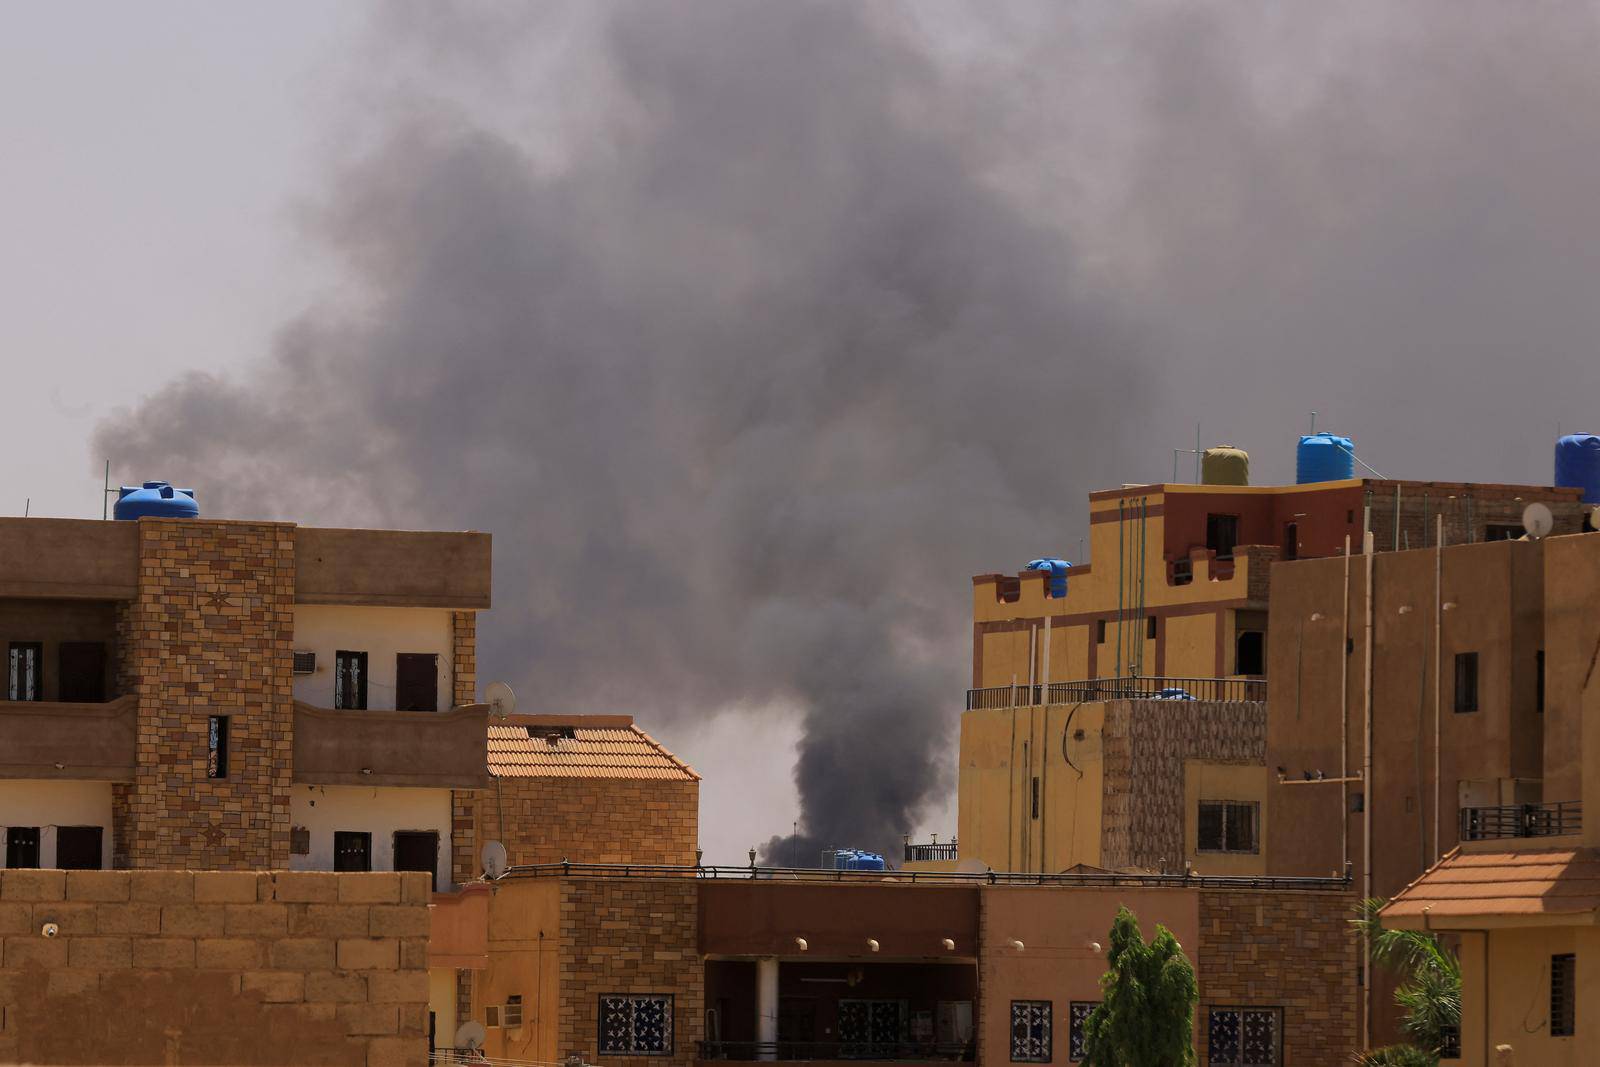 Smoke is seen rise from buildings in Khartoum North